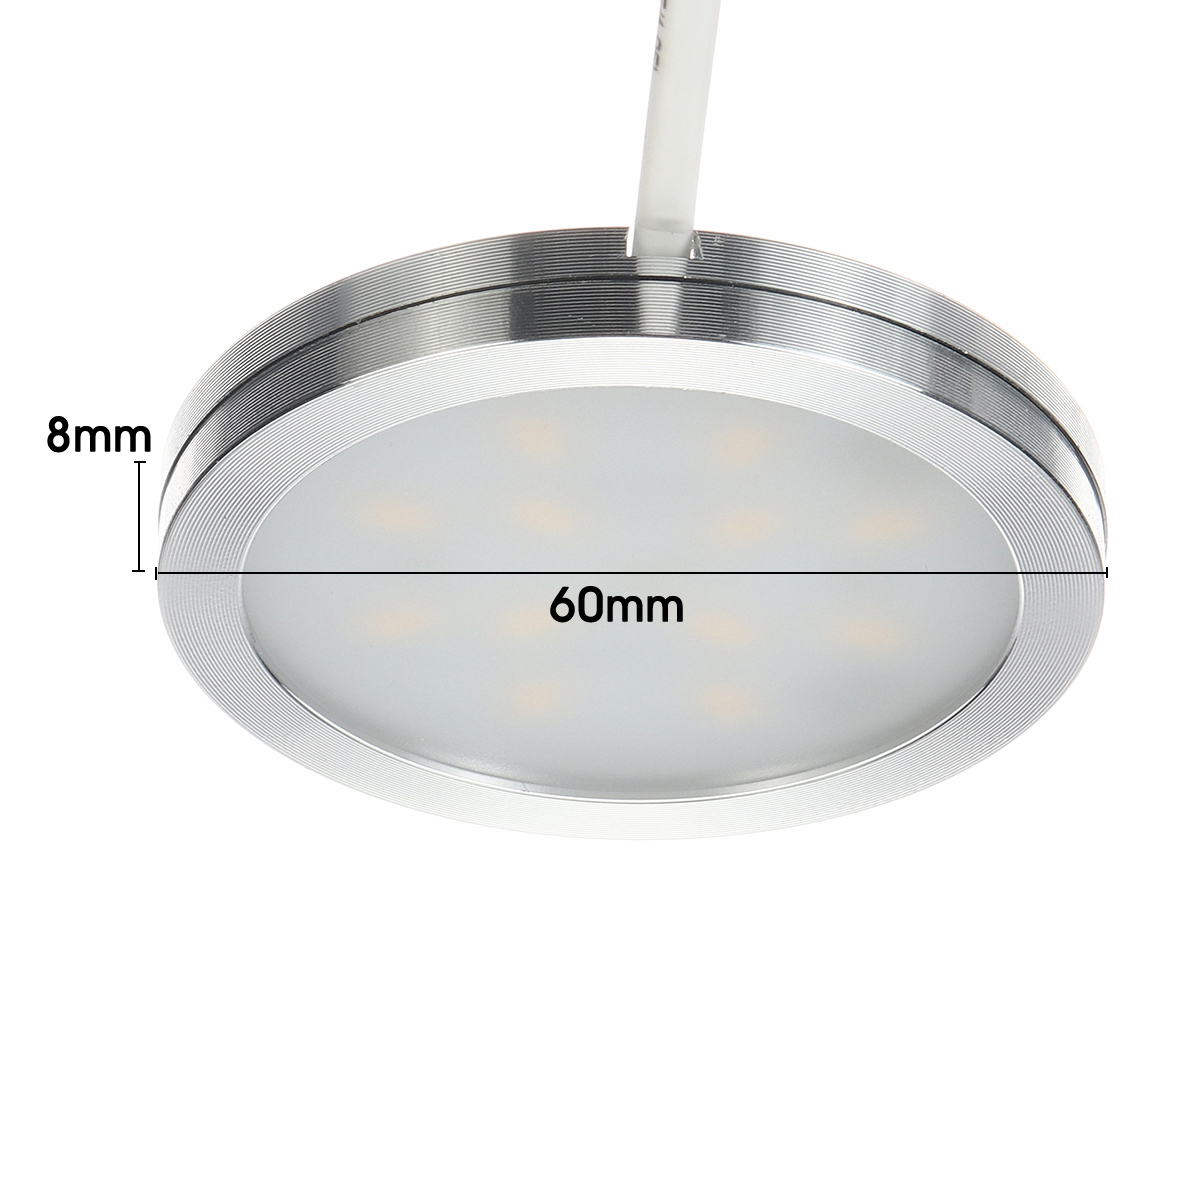 25W-6-In-1-LED-Under-Cabinet-Light-Ceiling-Panel-Down-Slim-Kitchen-Cupboard-Recessed-Lamp-DC12V-1705748-6